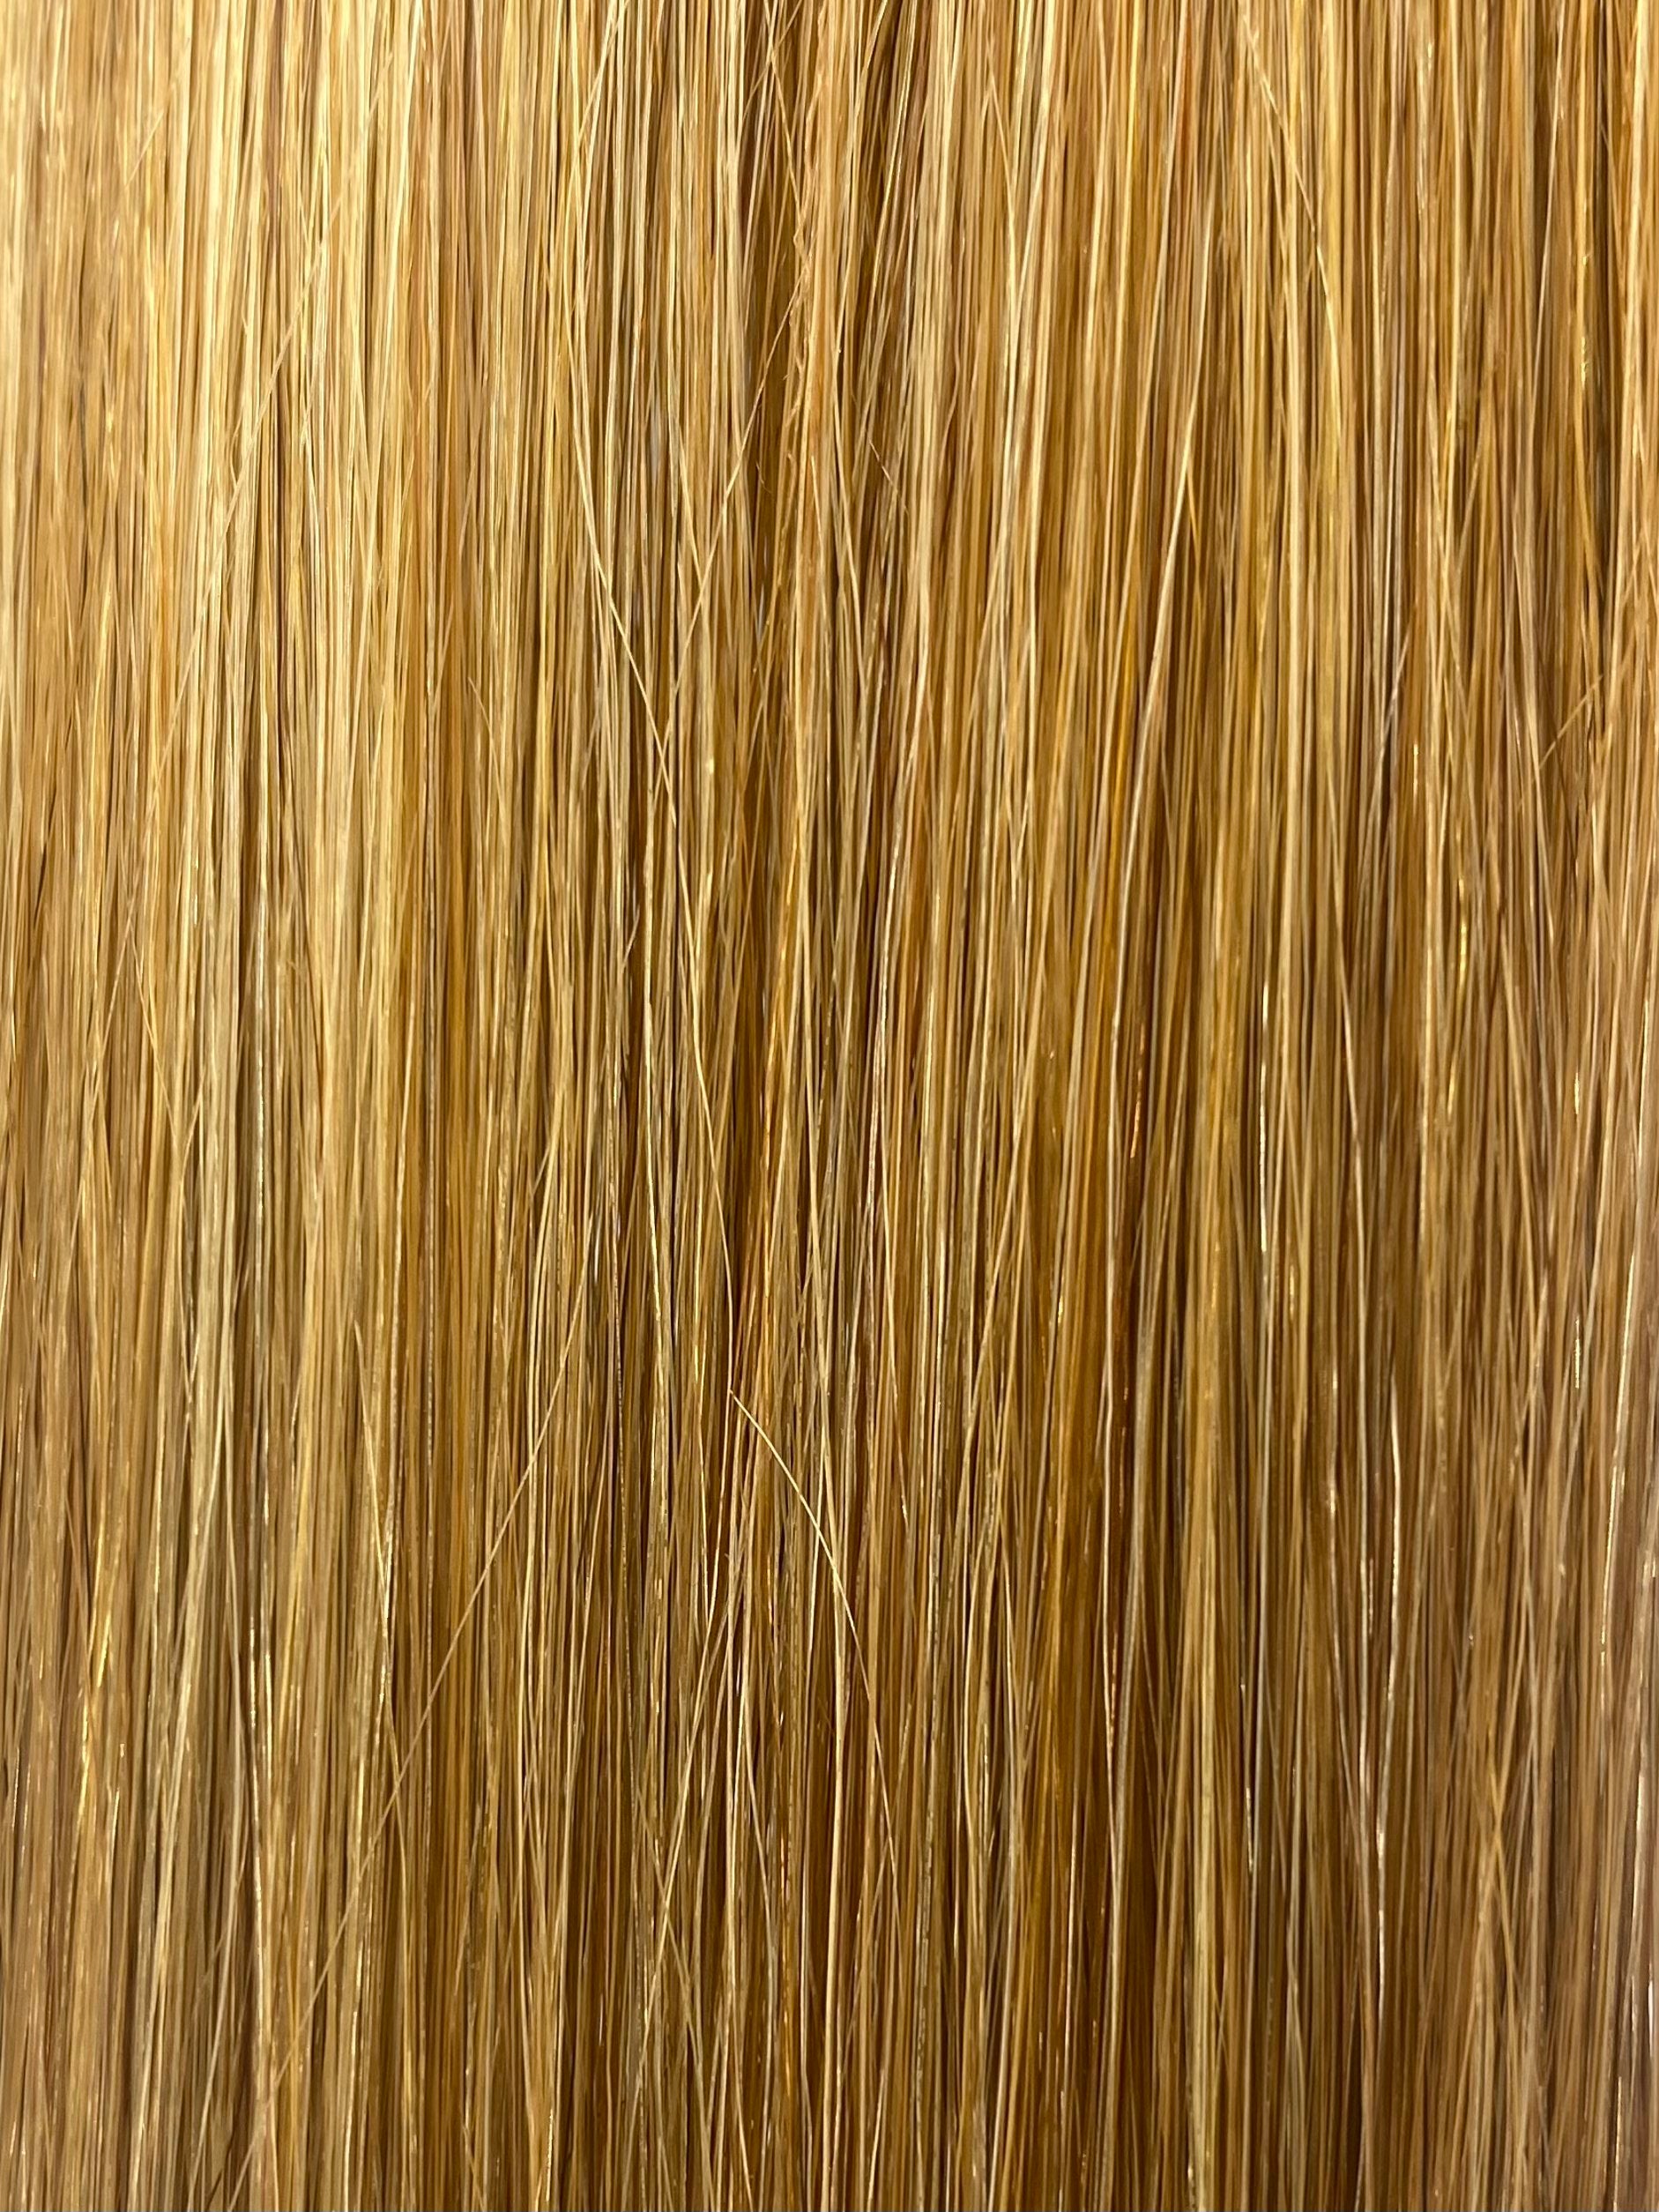 FUSION HIGHLIGHT #27/140 GOLDEN BLONDE/GOLDEN ULTRA BLONDE 40CM/ 16 INCHES  -  17.5 GRAMS - Image 1